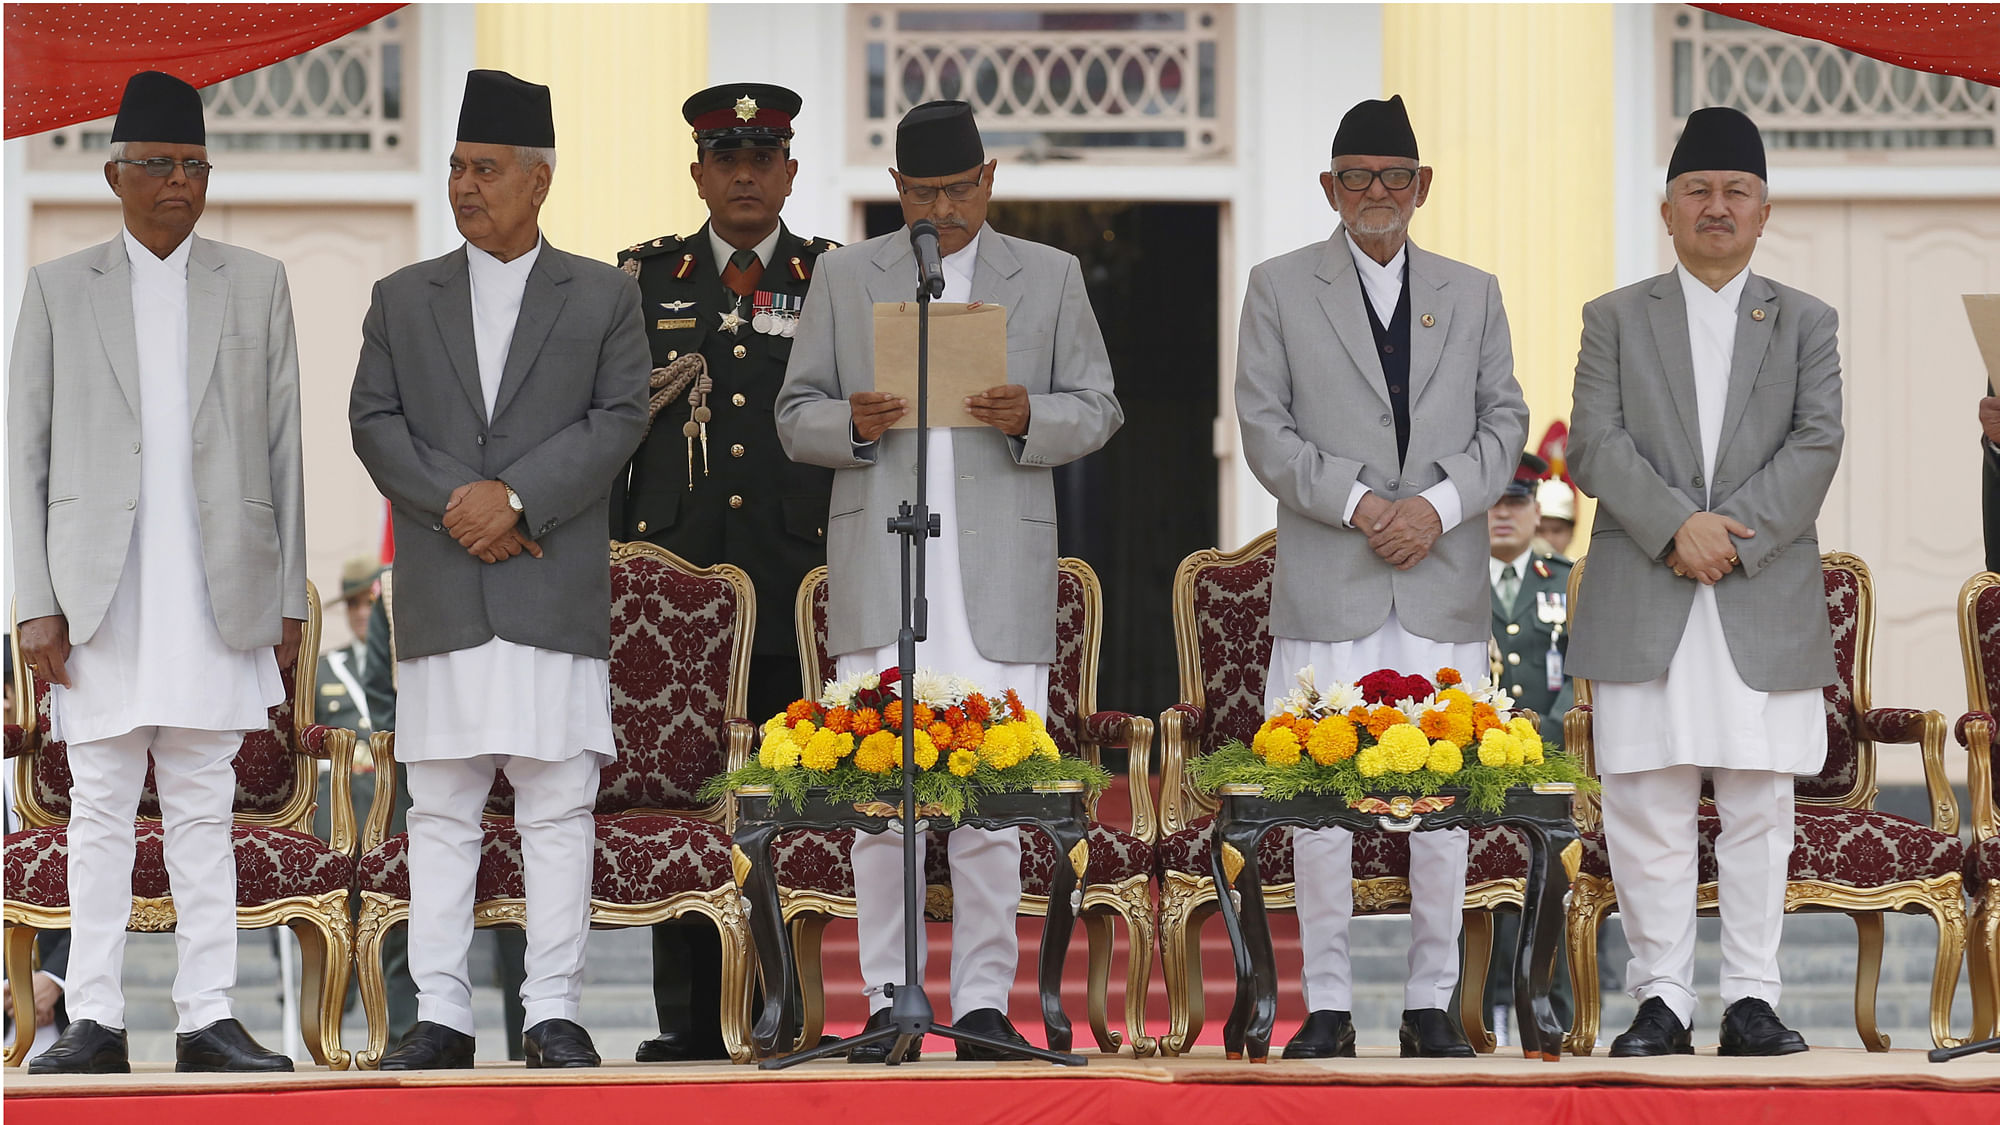 Nepal’s President Ram Baran Yadav (front 3rd L) administers the oath of office to the country’s newly-elected Prime Minister Khadga Prashad Sharma Oli. (Photo: Reuters)